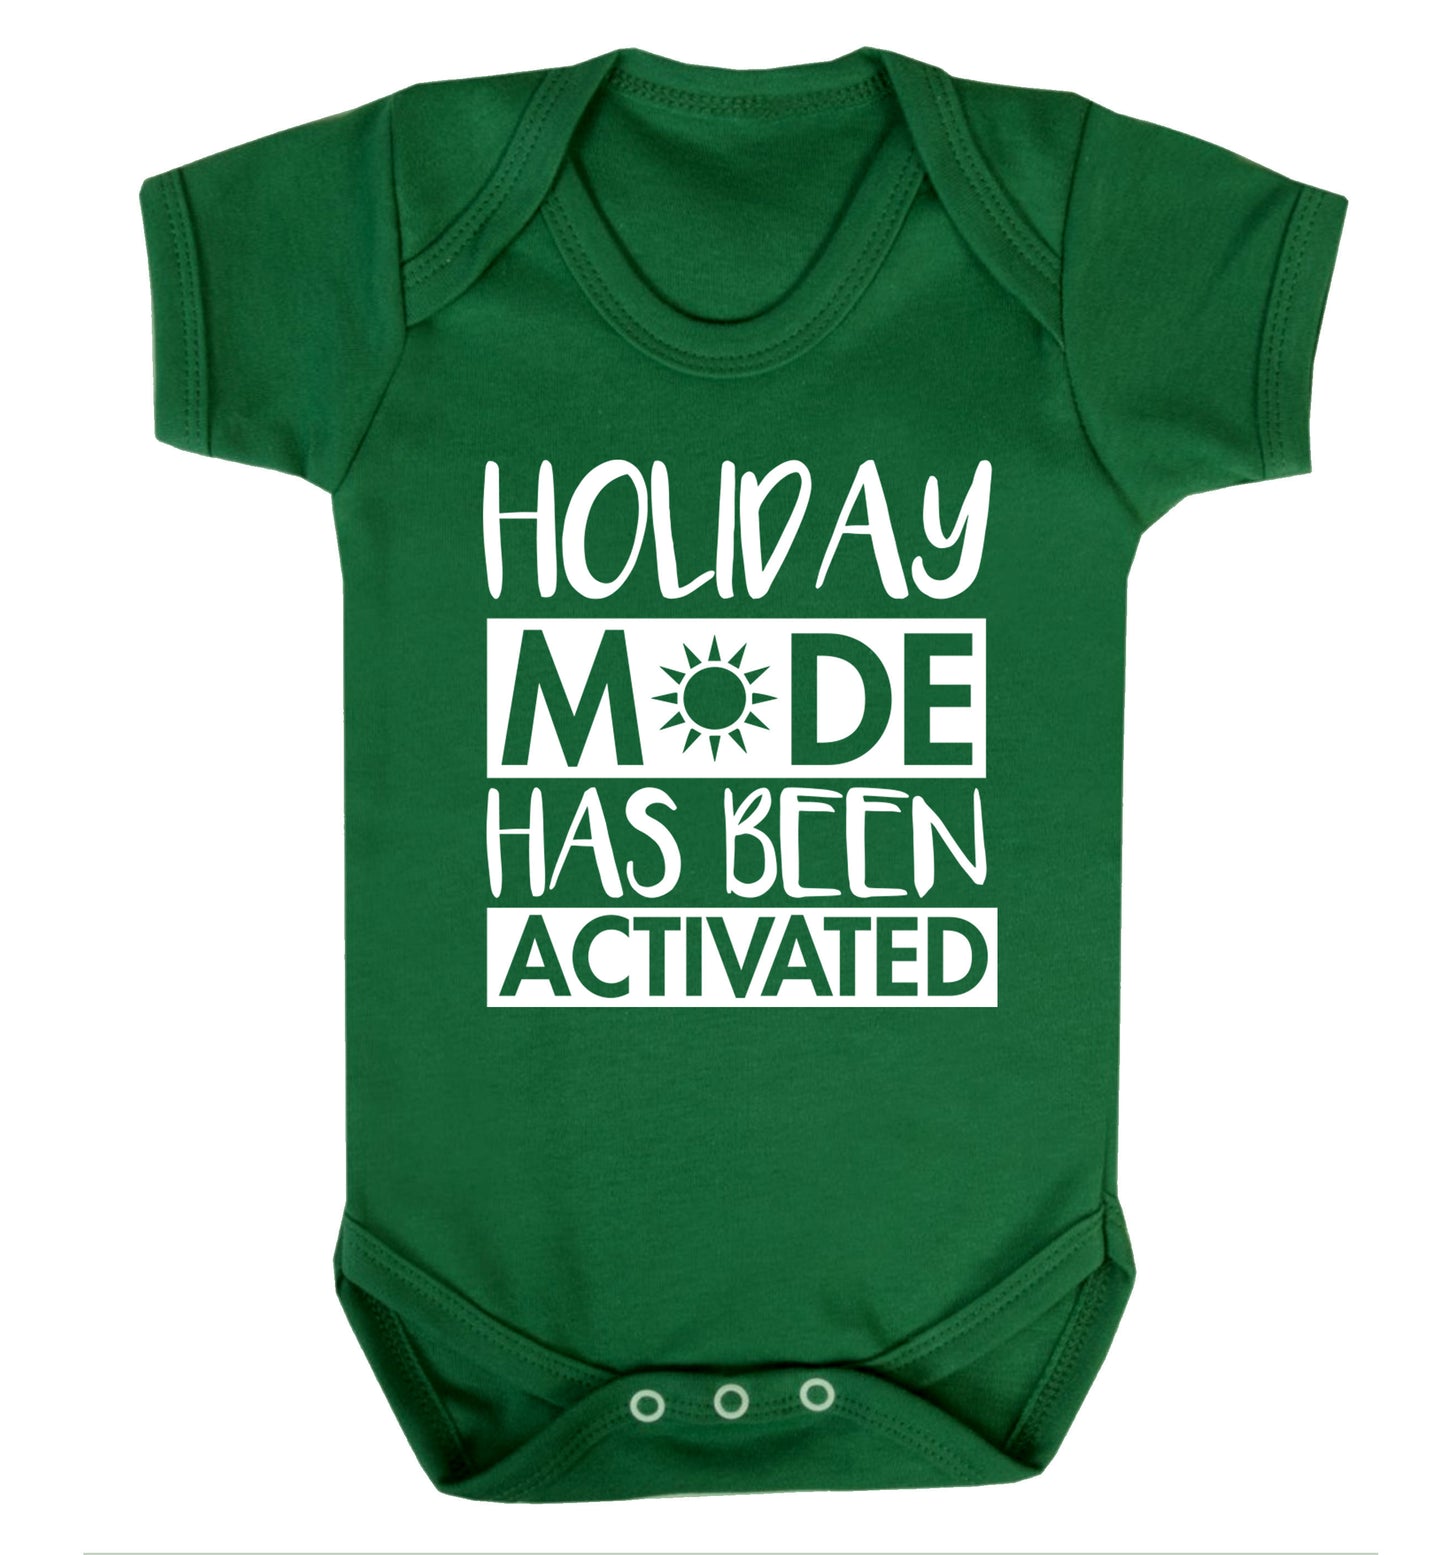 Holiday mode has been activated Baby Vest green 18-24 months